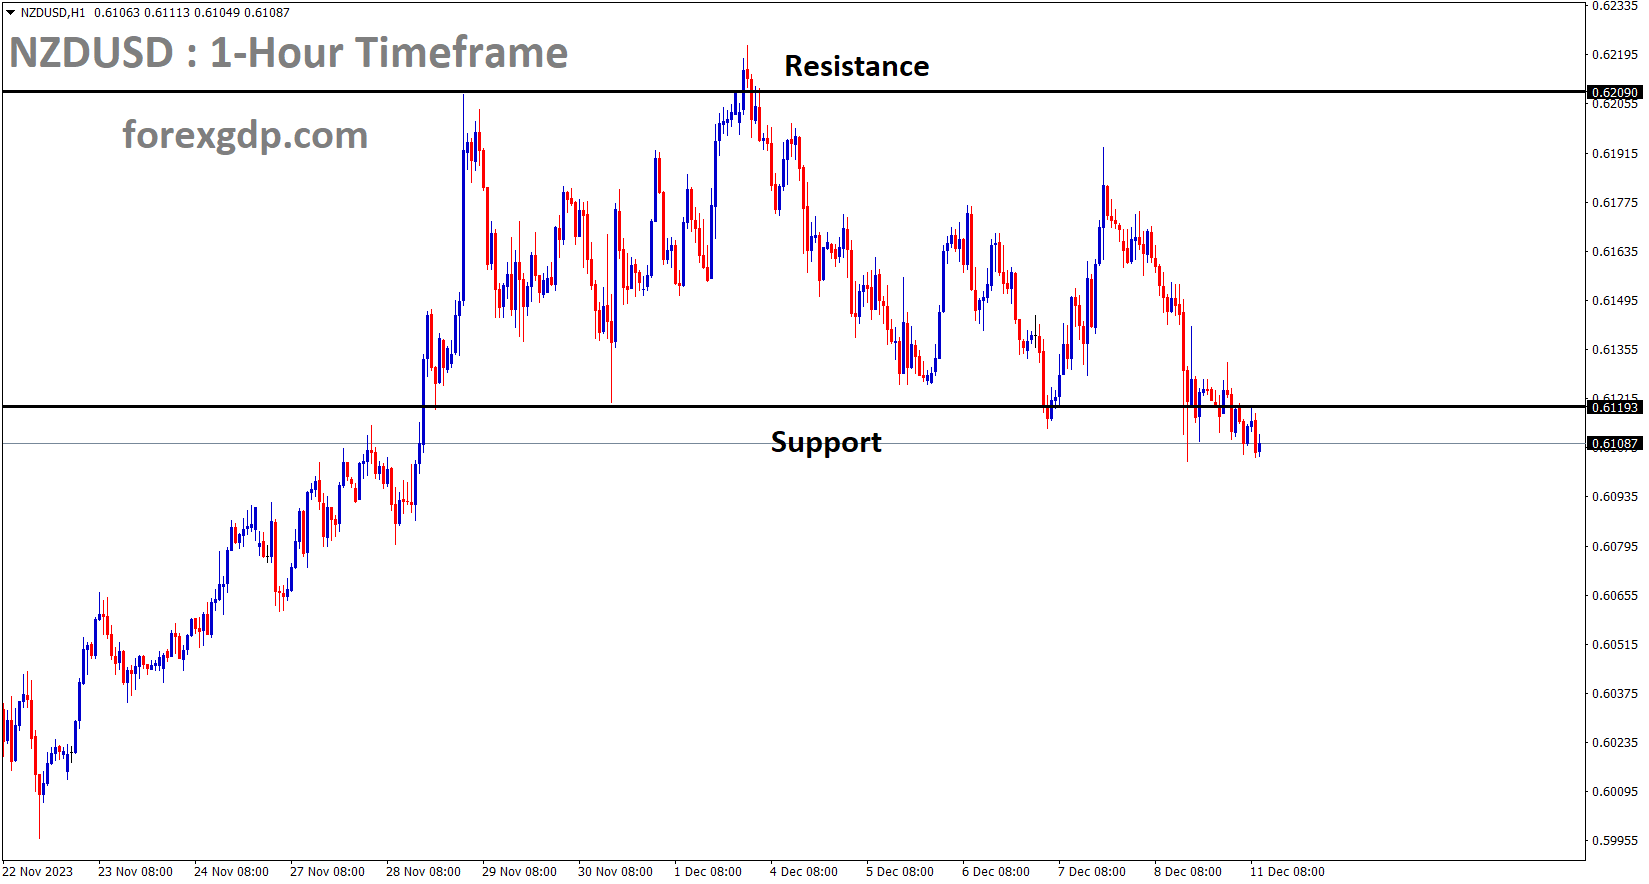 NZDUSD is moving in a box pattern and the market has reached the support area of the pattern